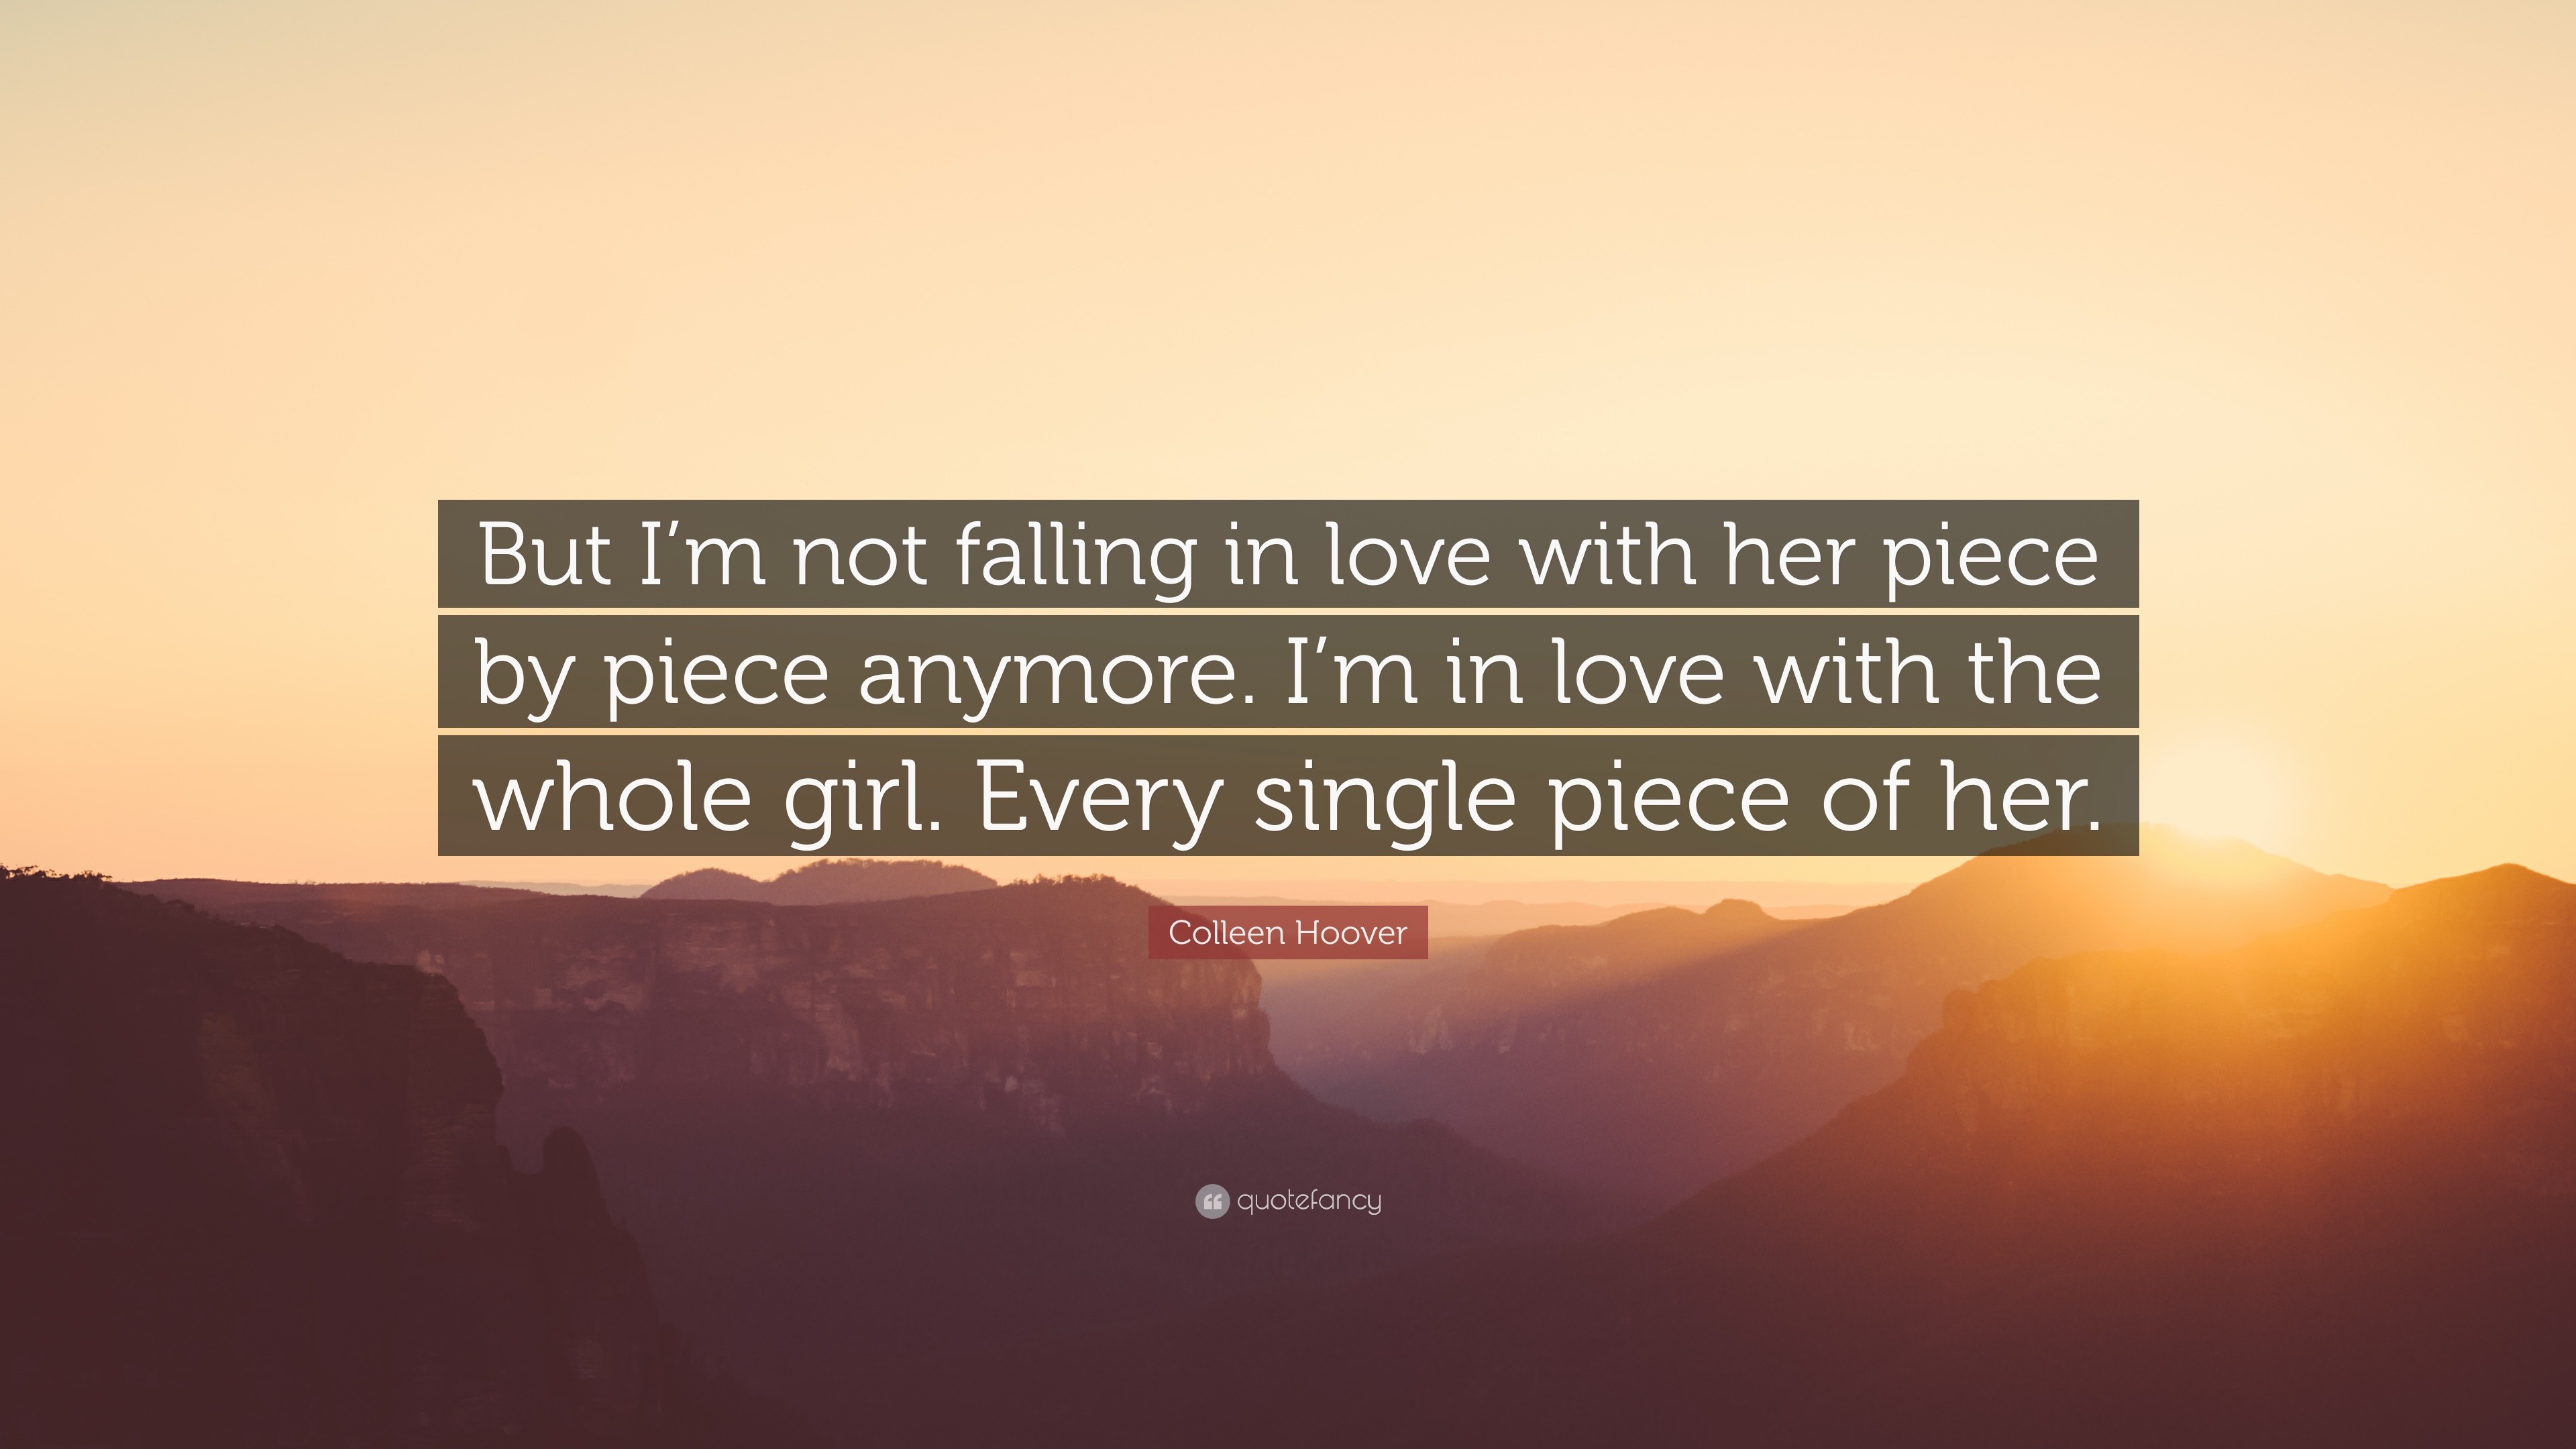 Colleen Hoover Quote “But I m not falling in love with her piece